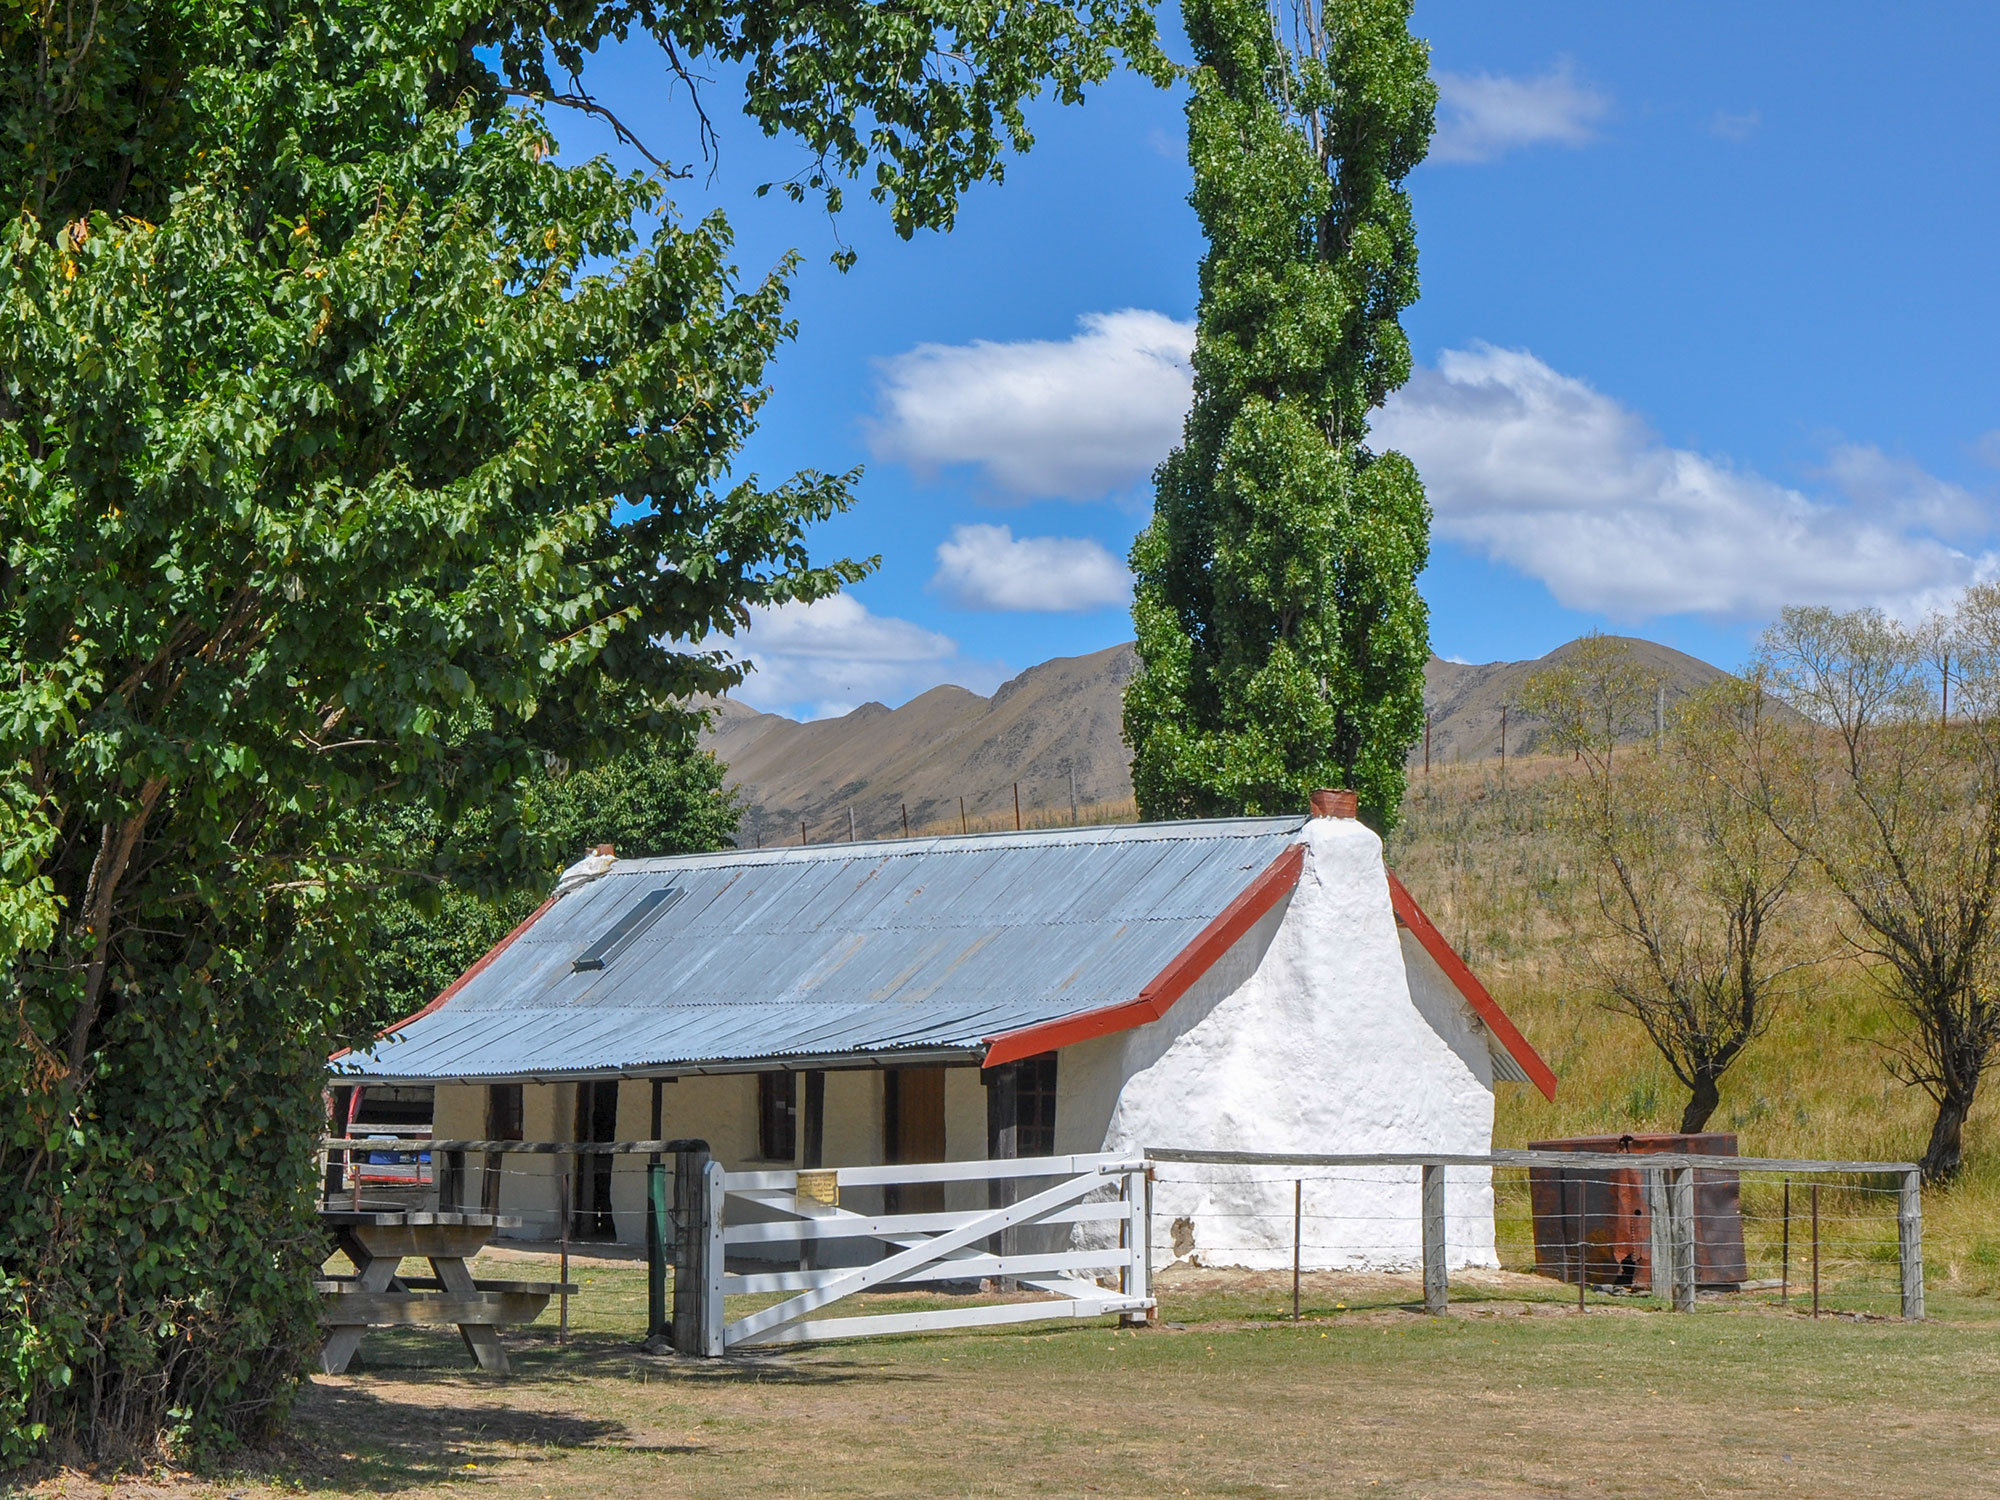 Historic whitewashed Pioneer cob cottage made of mud and straw on Molesworth Station